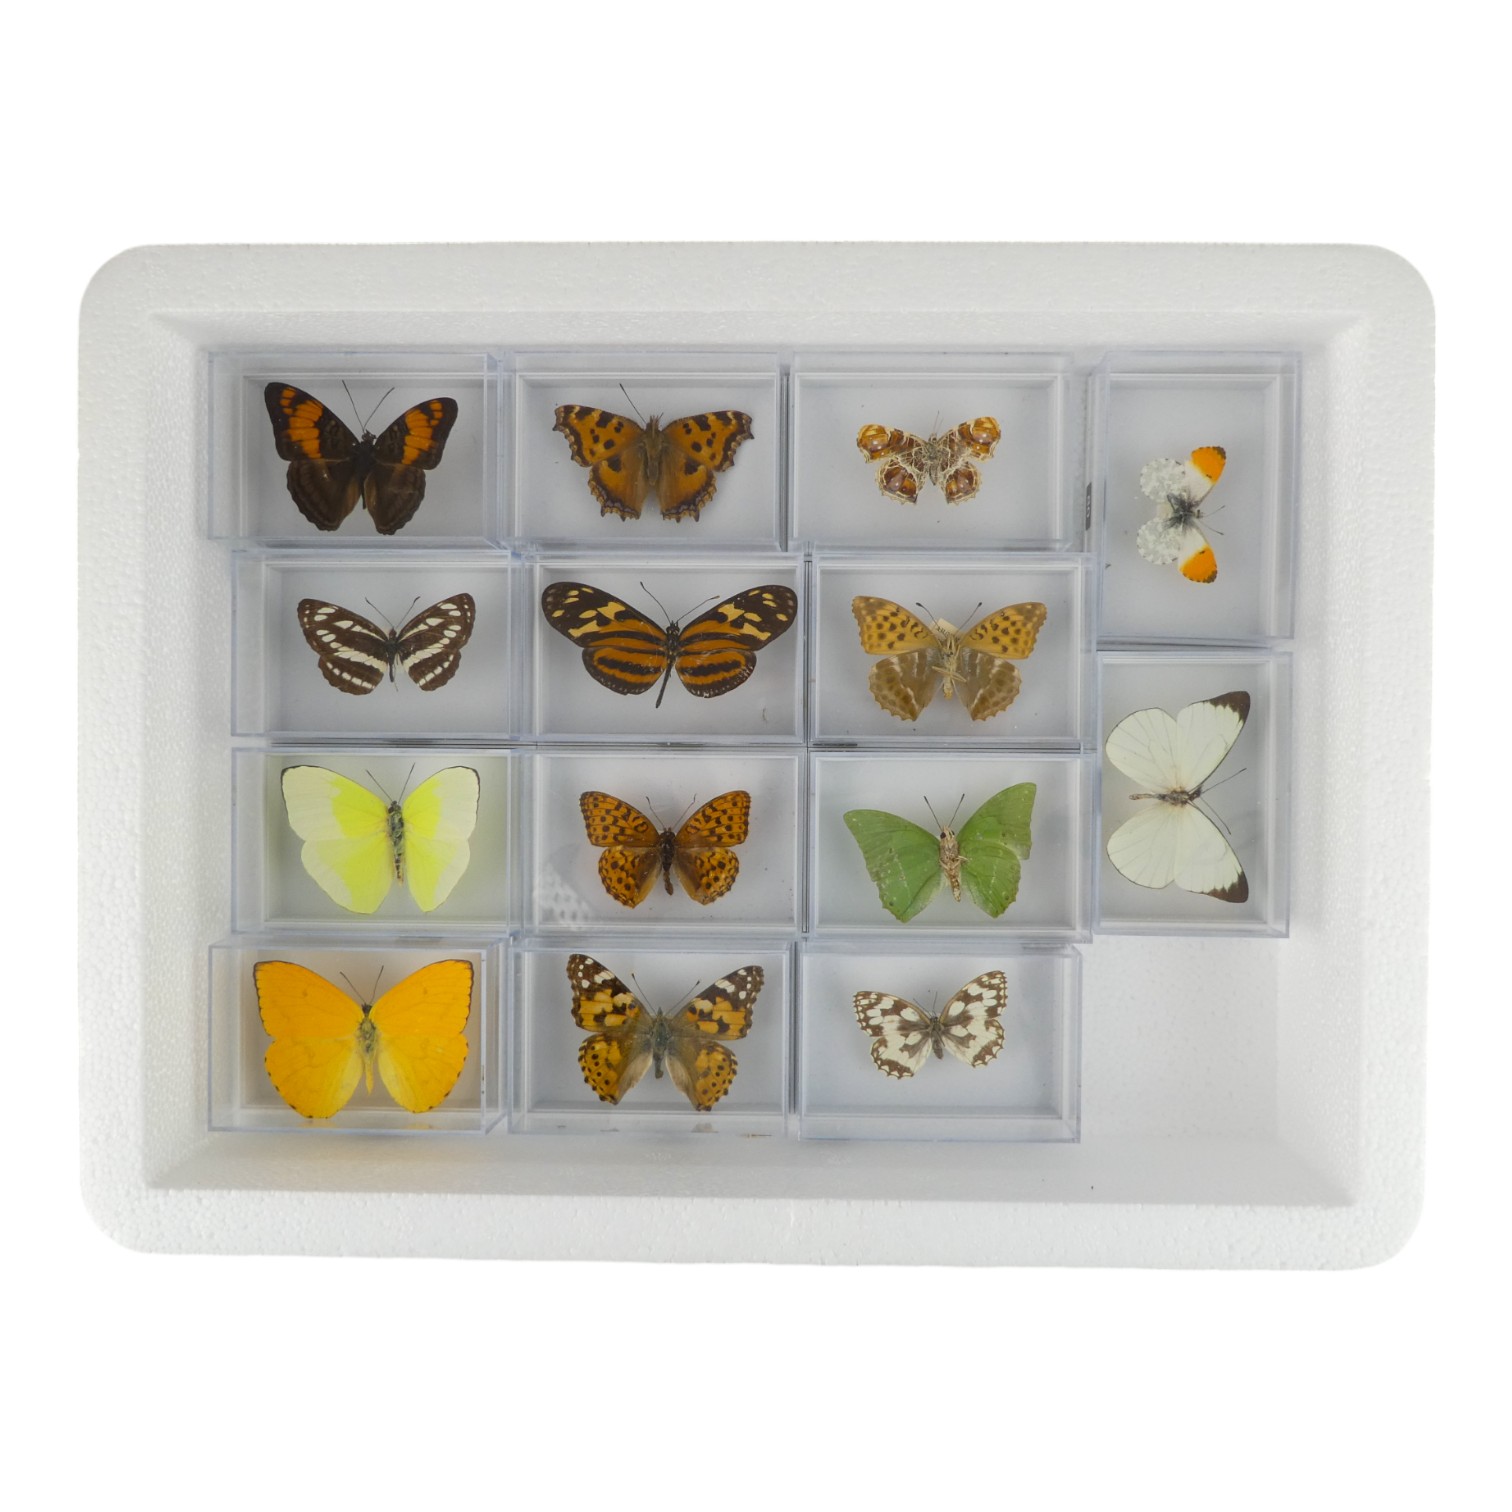 Eleven cased butterflies - including Green Charaxes, Common Glider and Painted Lady